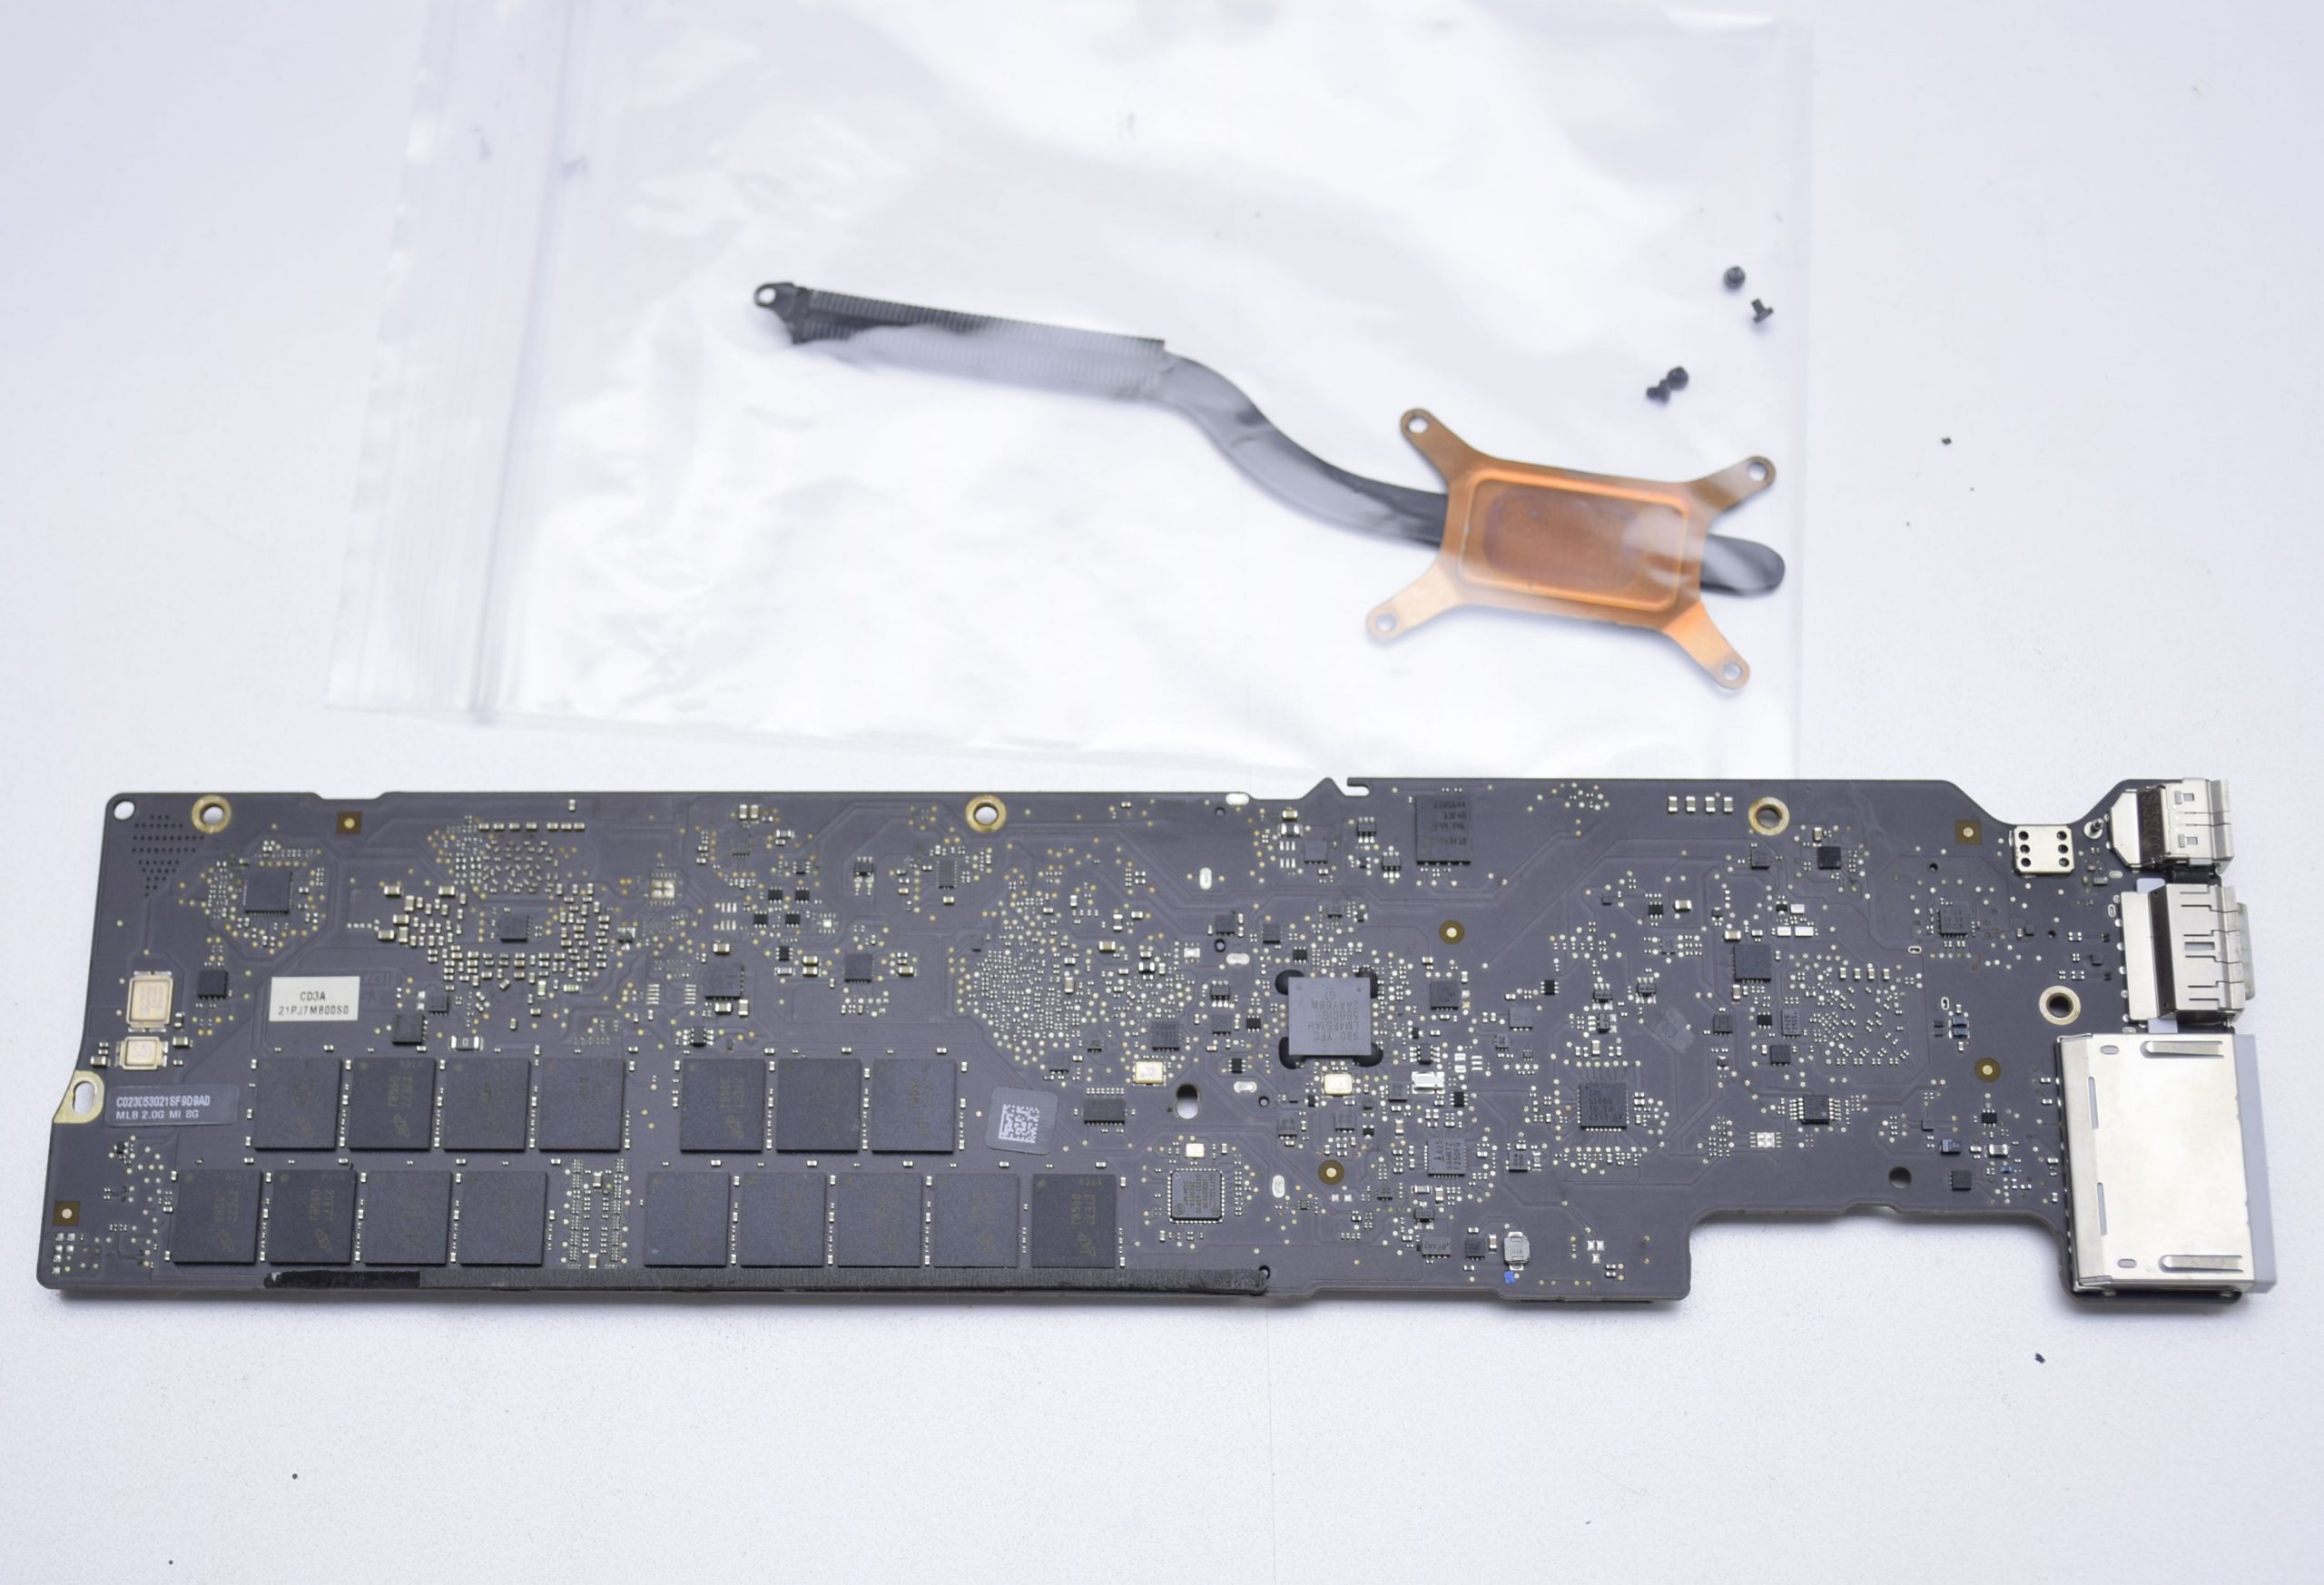 mid 2012 macbook pro motherboard replacement how to